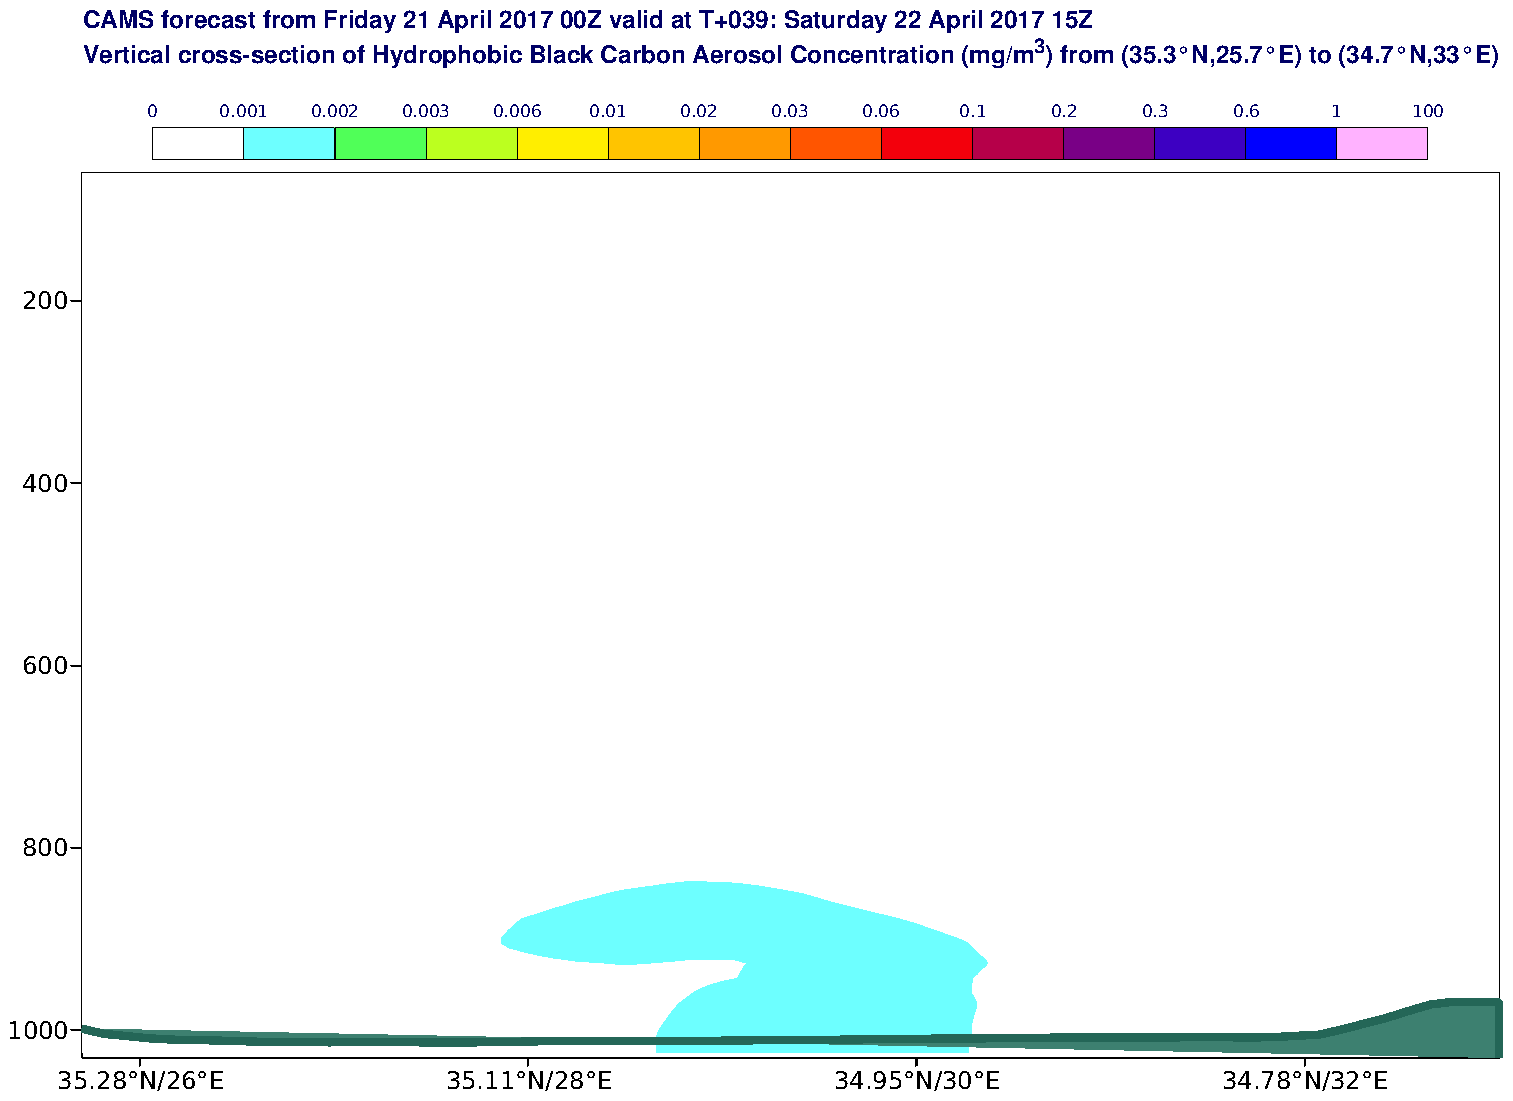 Vertical cross-section of Hydrophobic Black Carbon Aerosol Concentration (mg/m3) valid at T39 - 2017-04-22 15:00